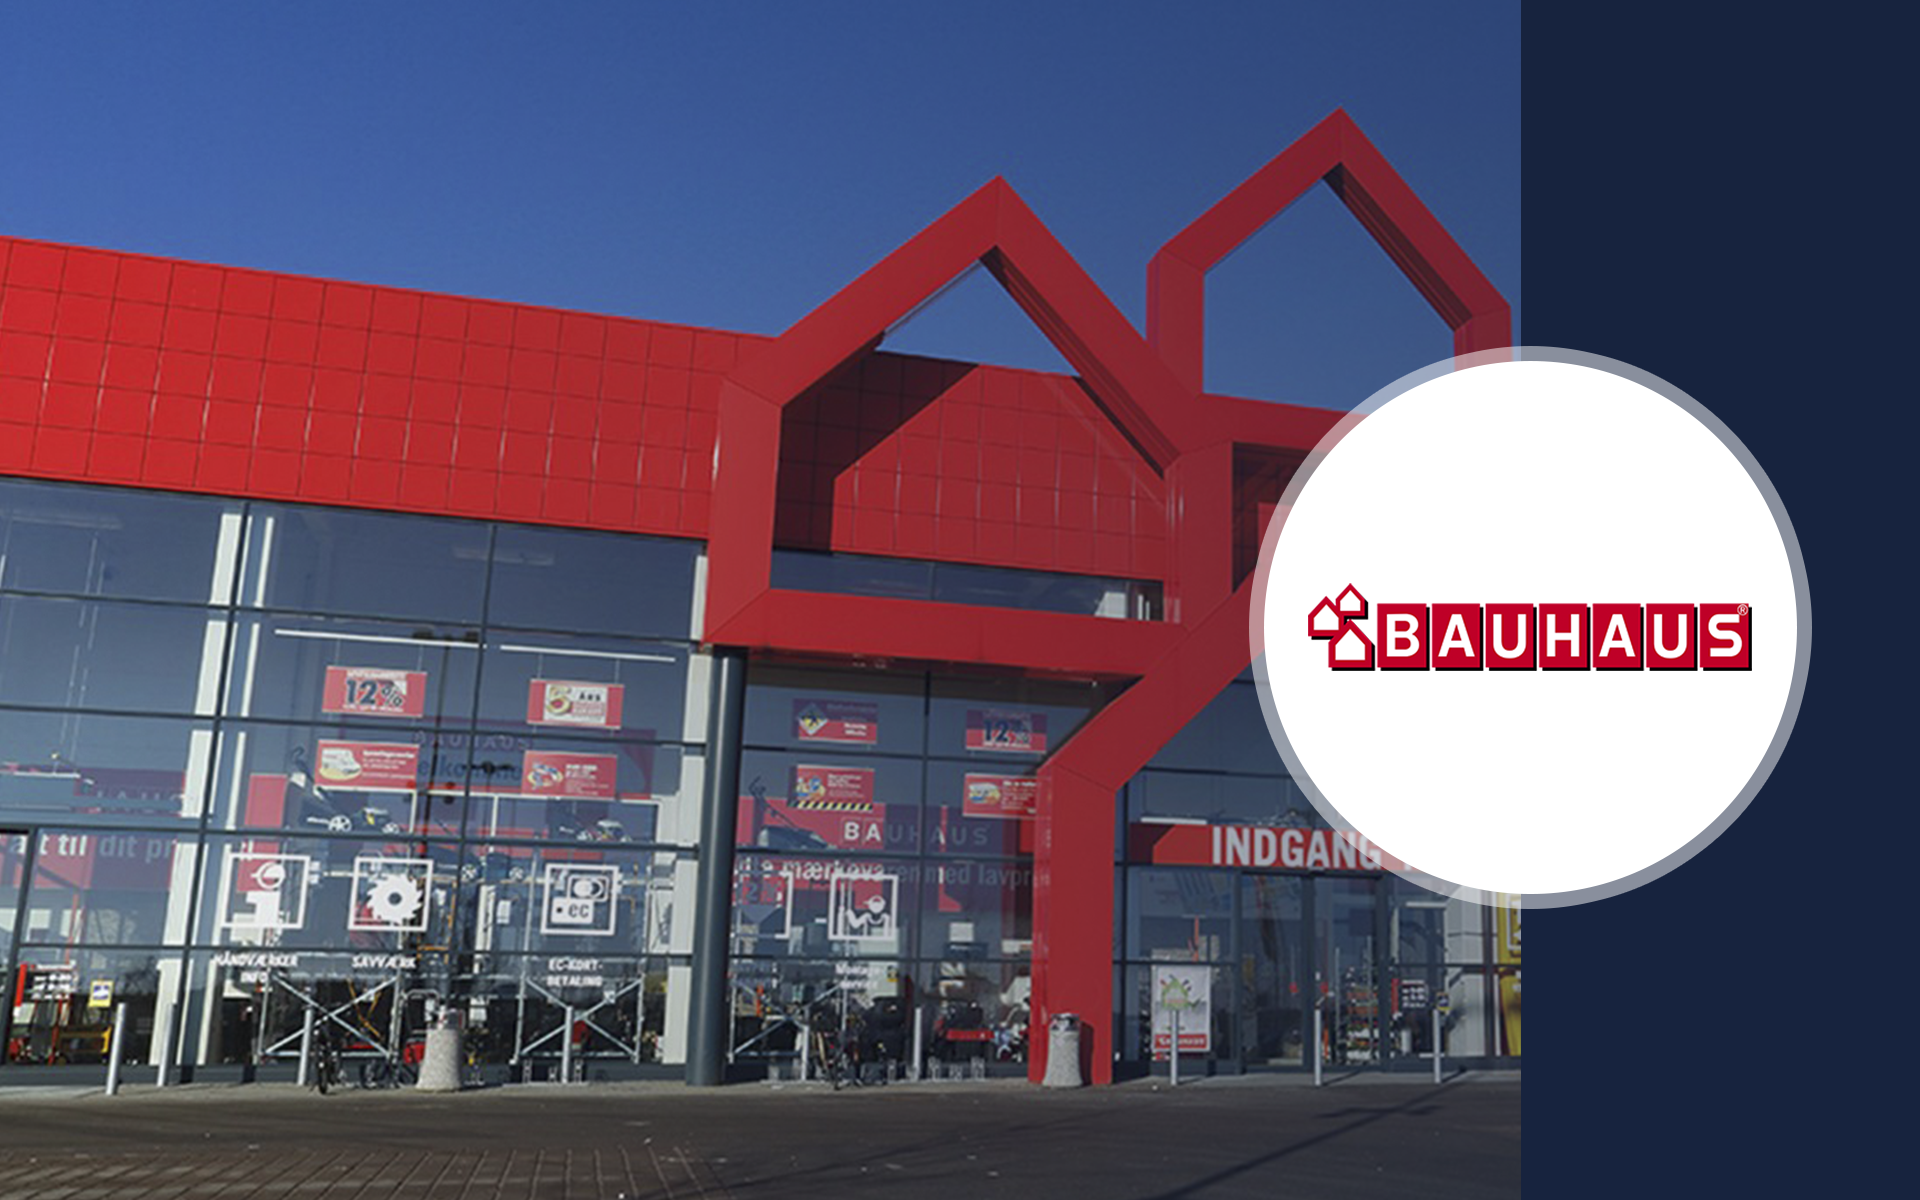 How Bauhaus Reduced Lead Price by 64% in META Using a Customer Data Platform (CDP)